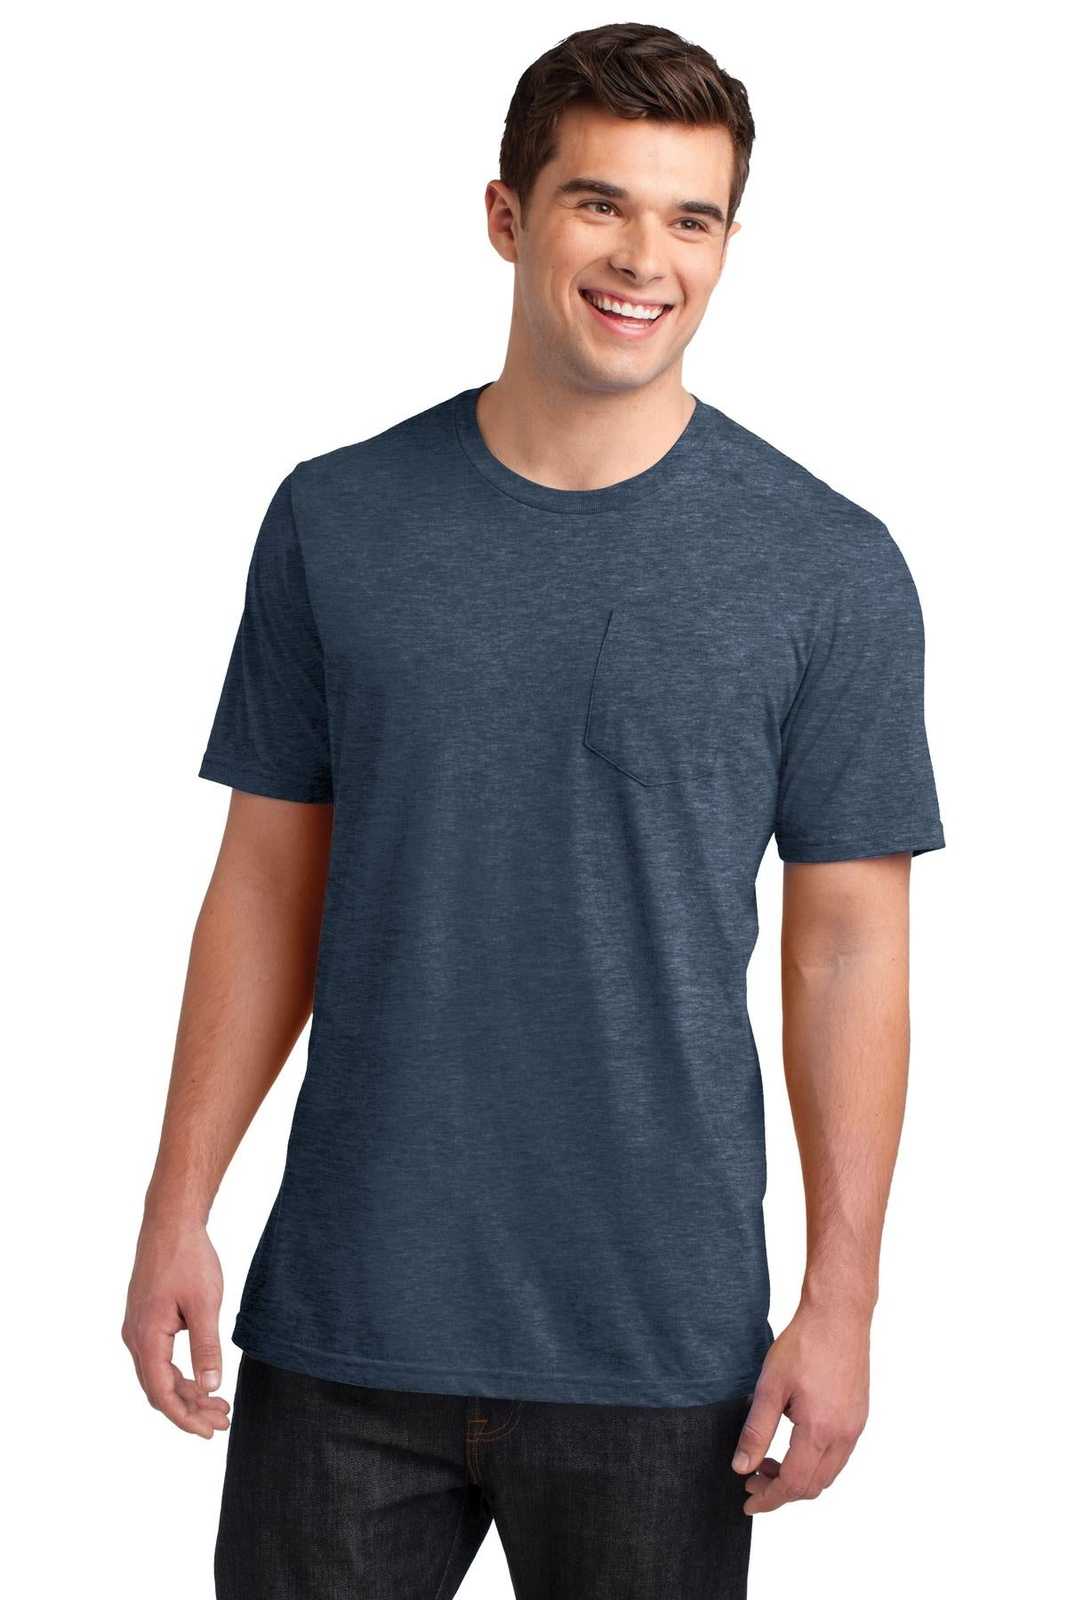 District DT6000P Very Important Tee with Pocket - Heathered Navy - HIT a Double - 1